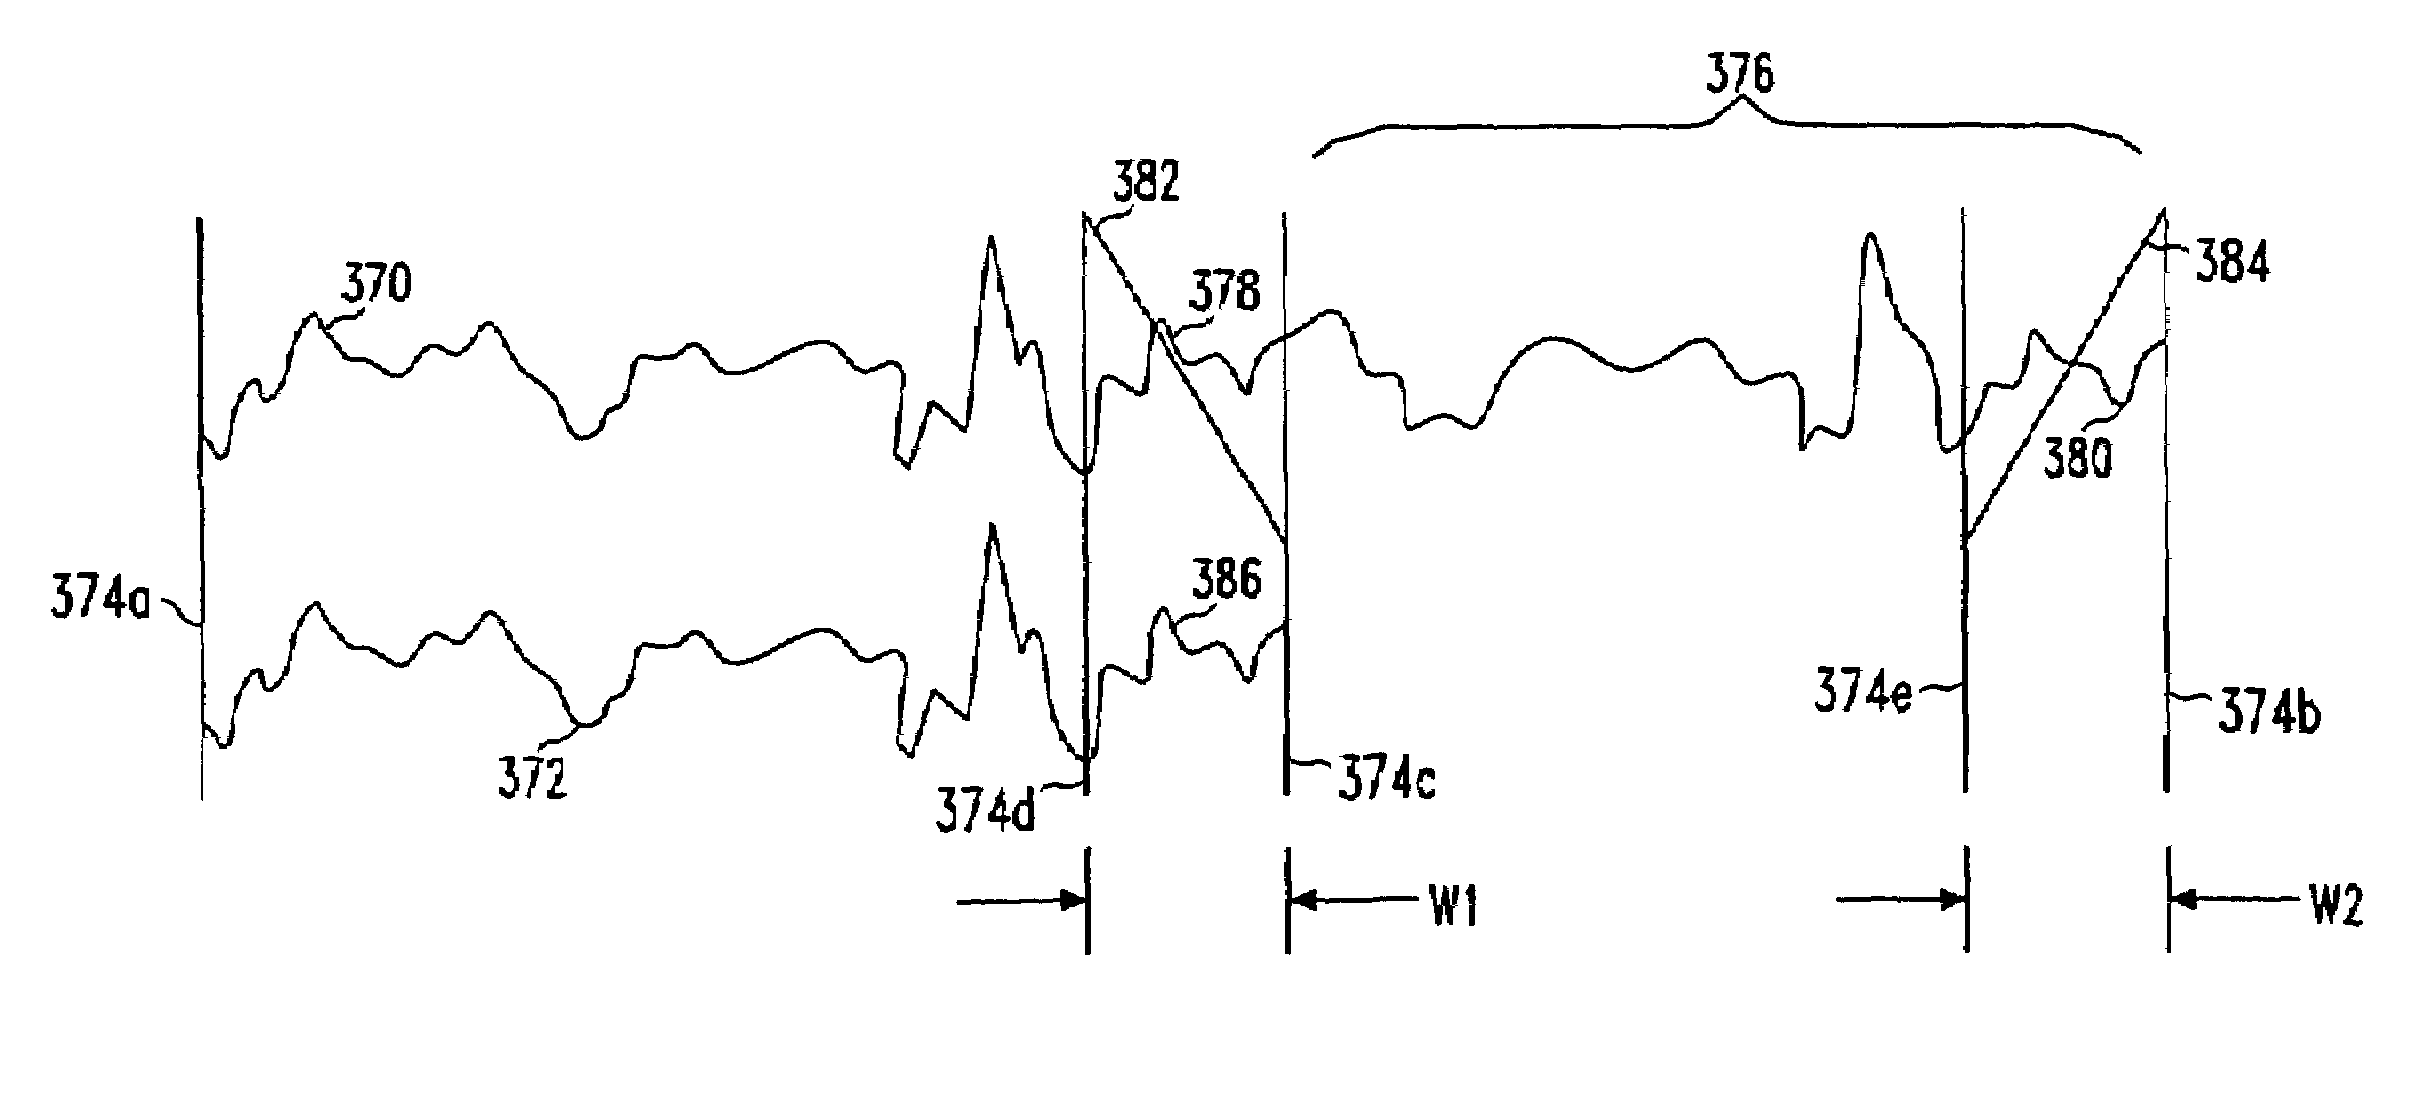 Method and apparatus for reducing access delay in discontinuous transmission packet telephony systems